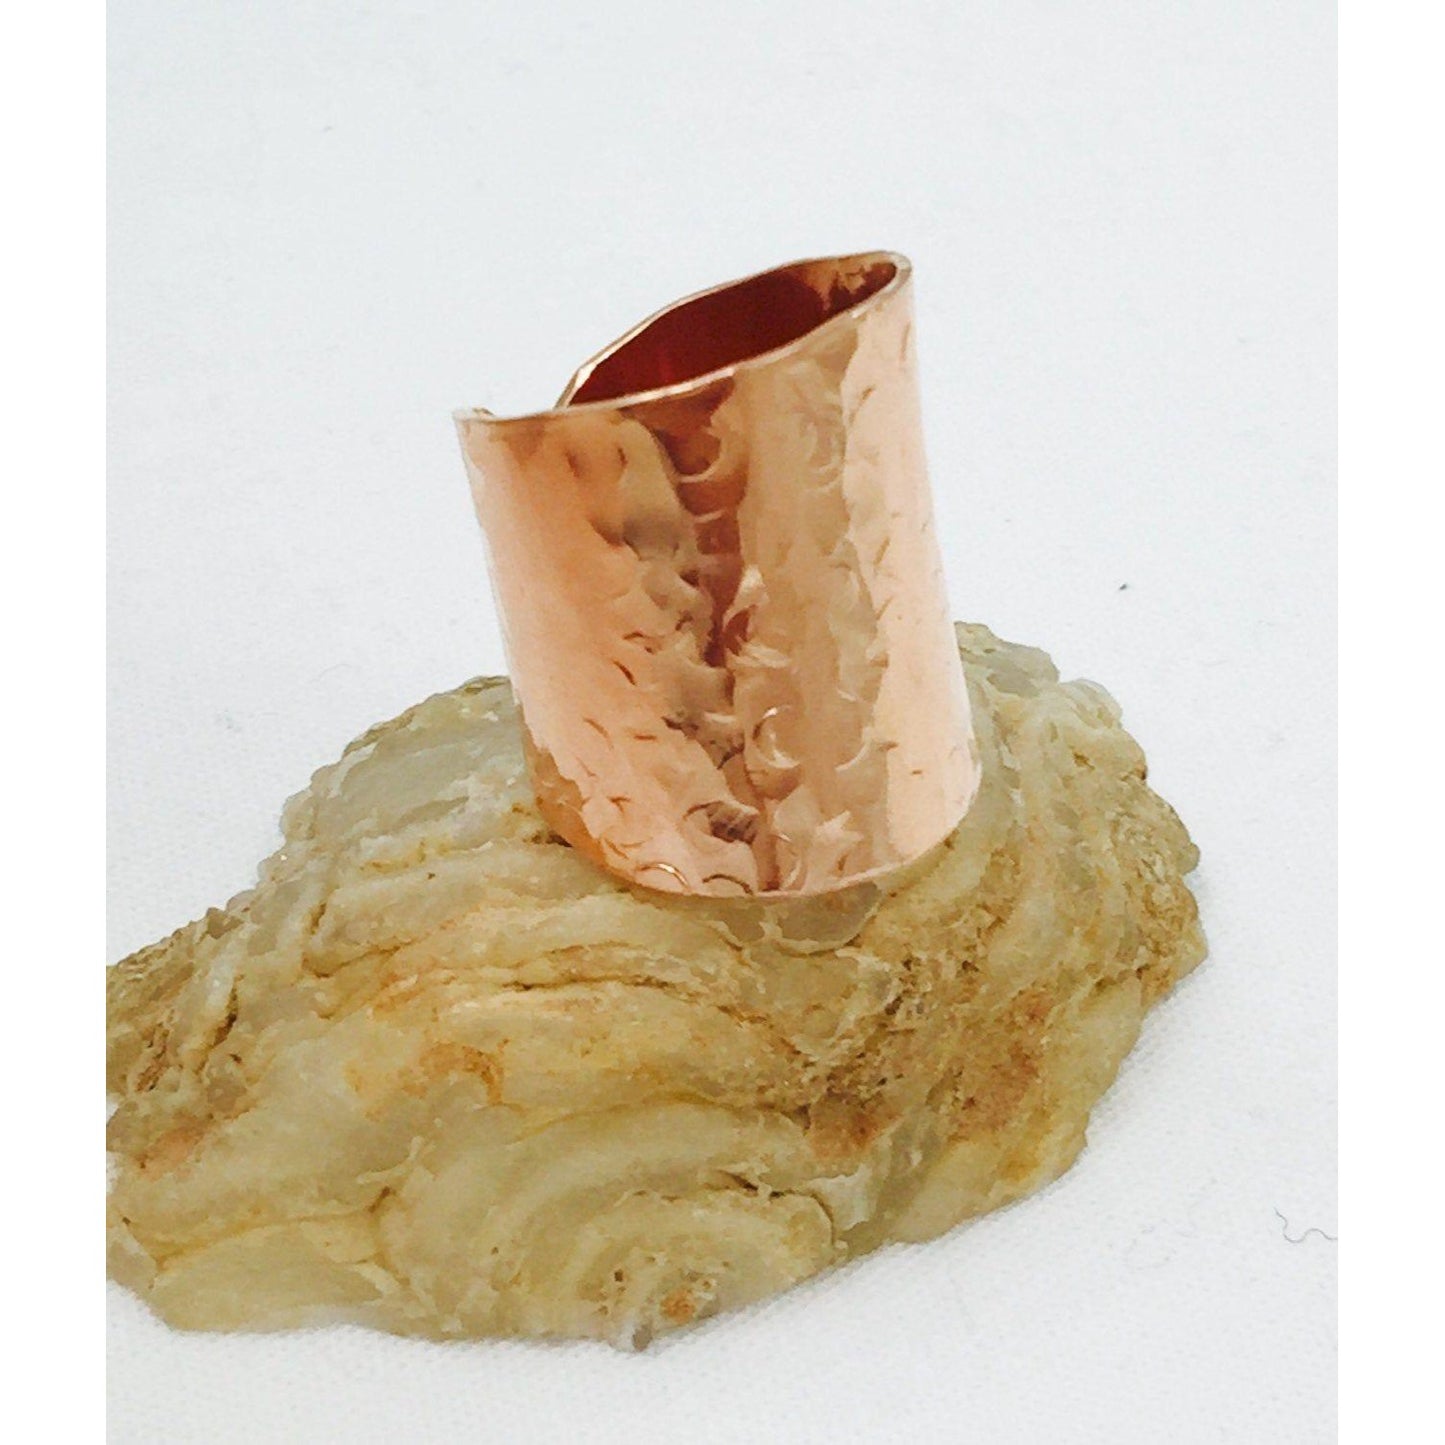 Cuff Ring, Wide band Ring, Copper Tube Ring, Statement Ring, Copper Ring, Champagne Collection